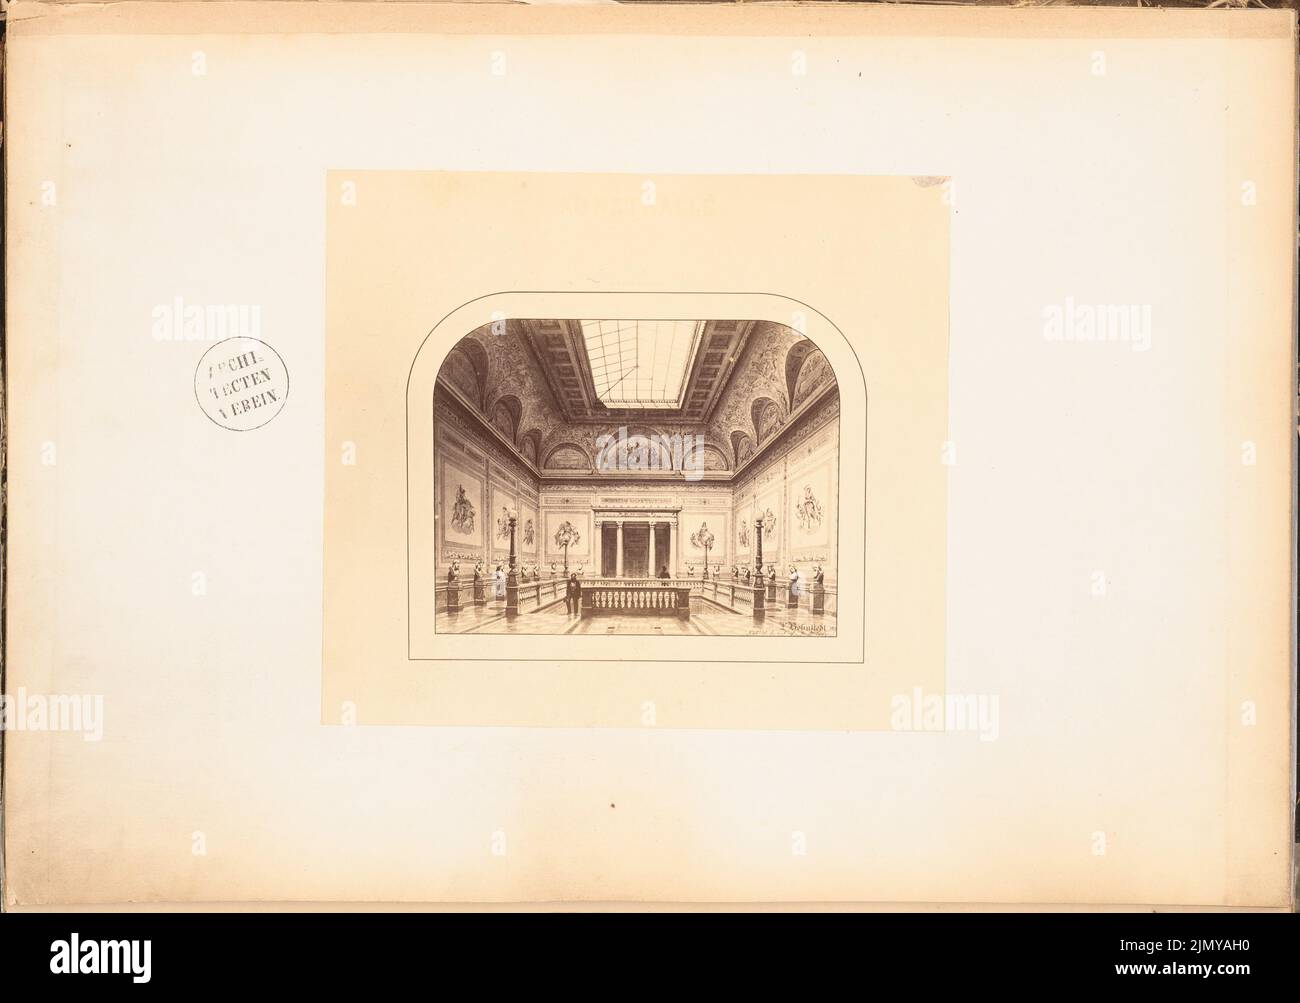 Bohnstedt Ludwig Franz Karl (1822-1885), Kunsthalle. (From: Competitive designs. Photographs by Bohnstedt's designs, 1857-1864.) (1863): Perspective interior view staircase. Photo on paper, 32 x 45.5 cm (including scan edges) Stock Photo